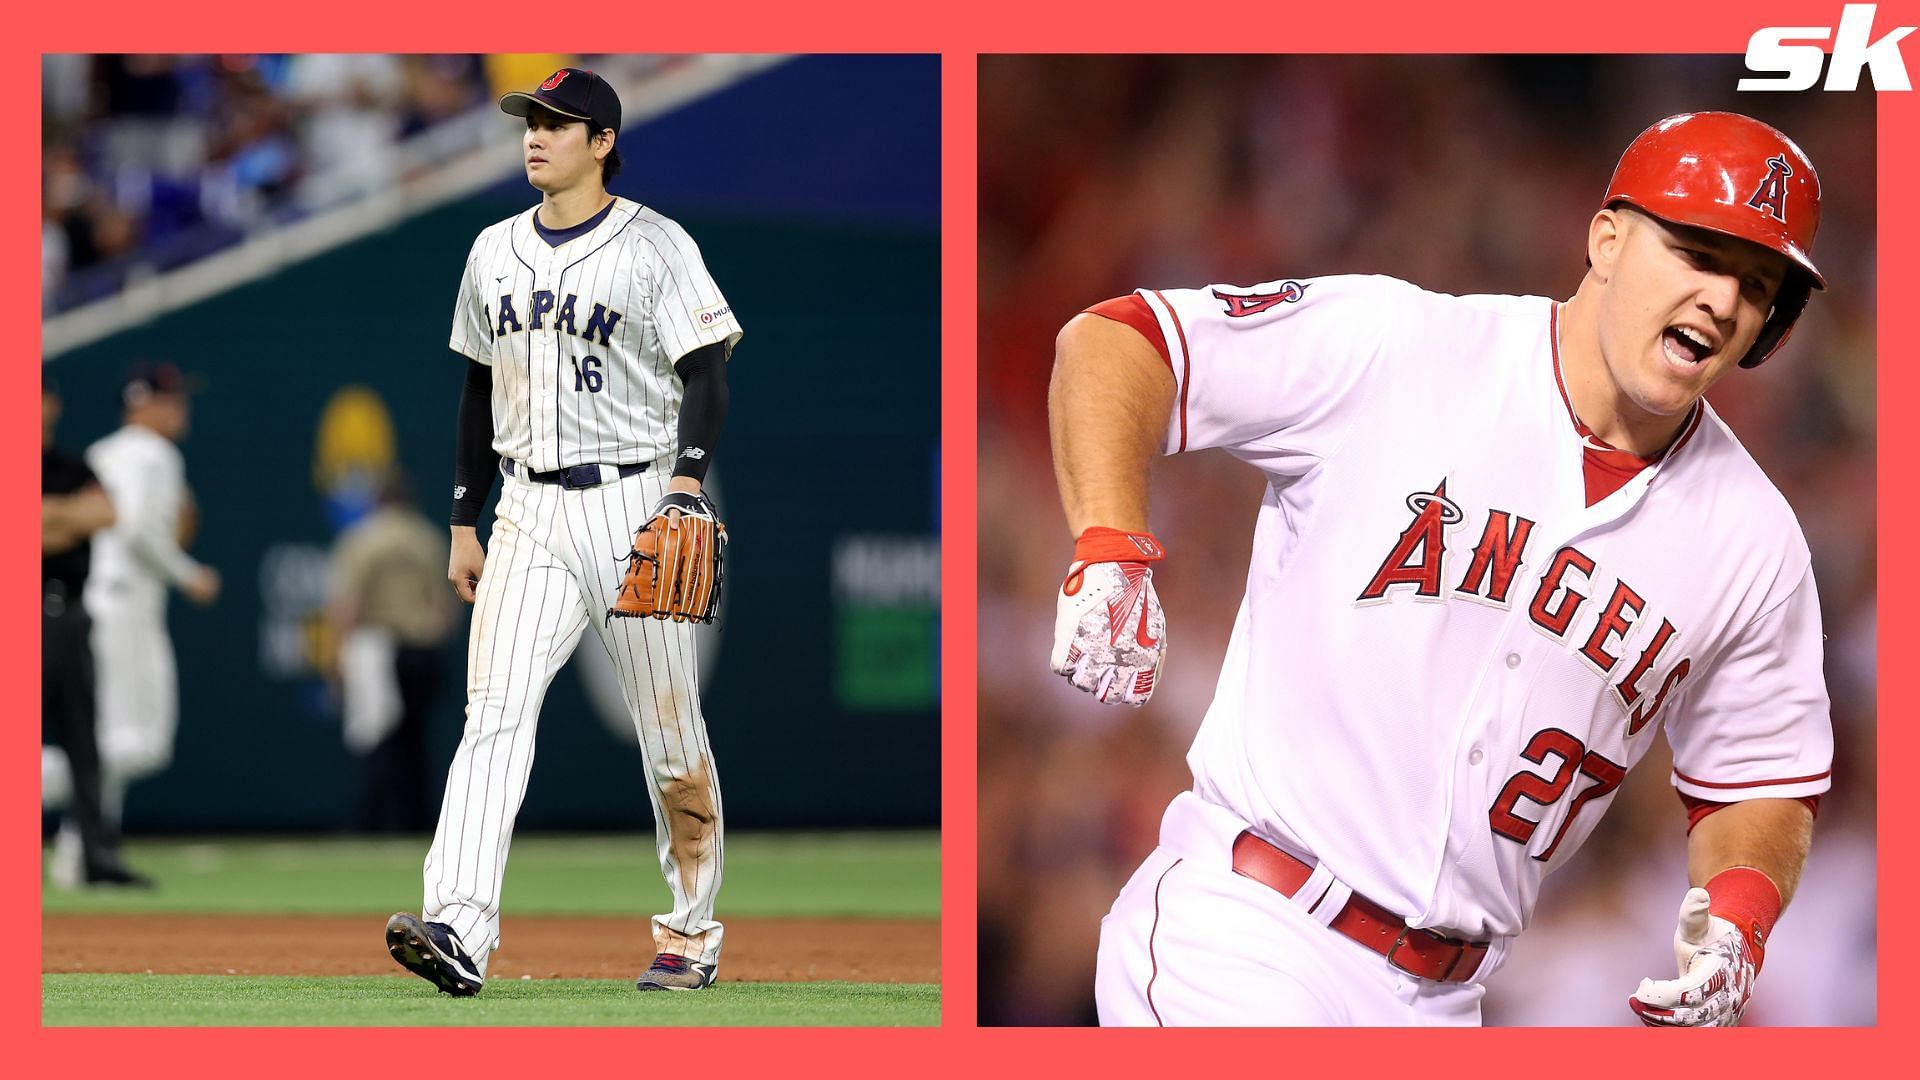 Shohei Ohtani and Mike Trout of the Los Angeles Angels